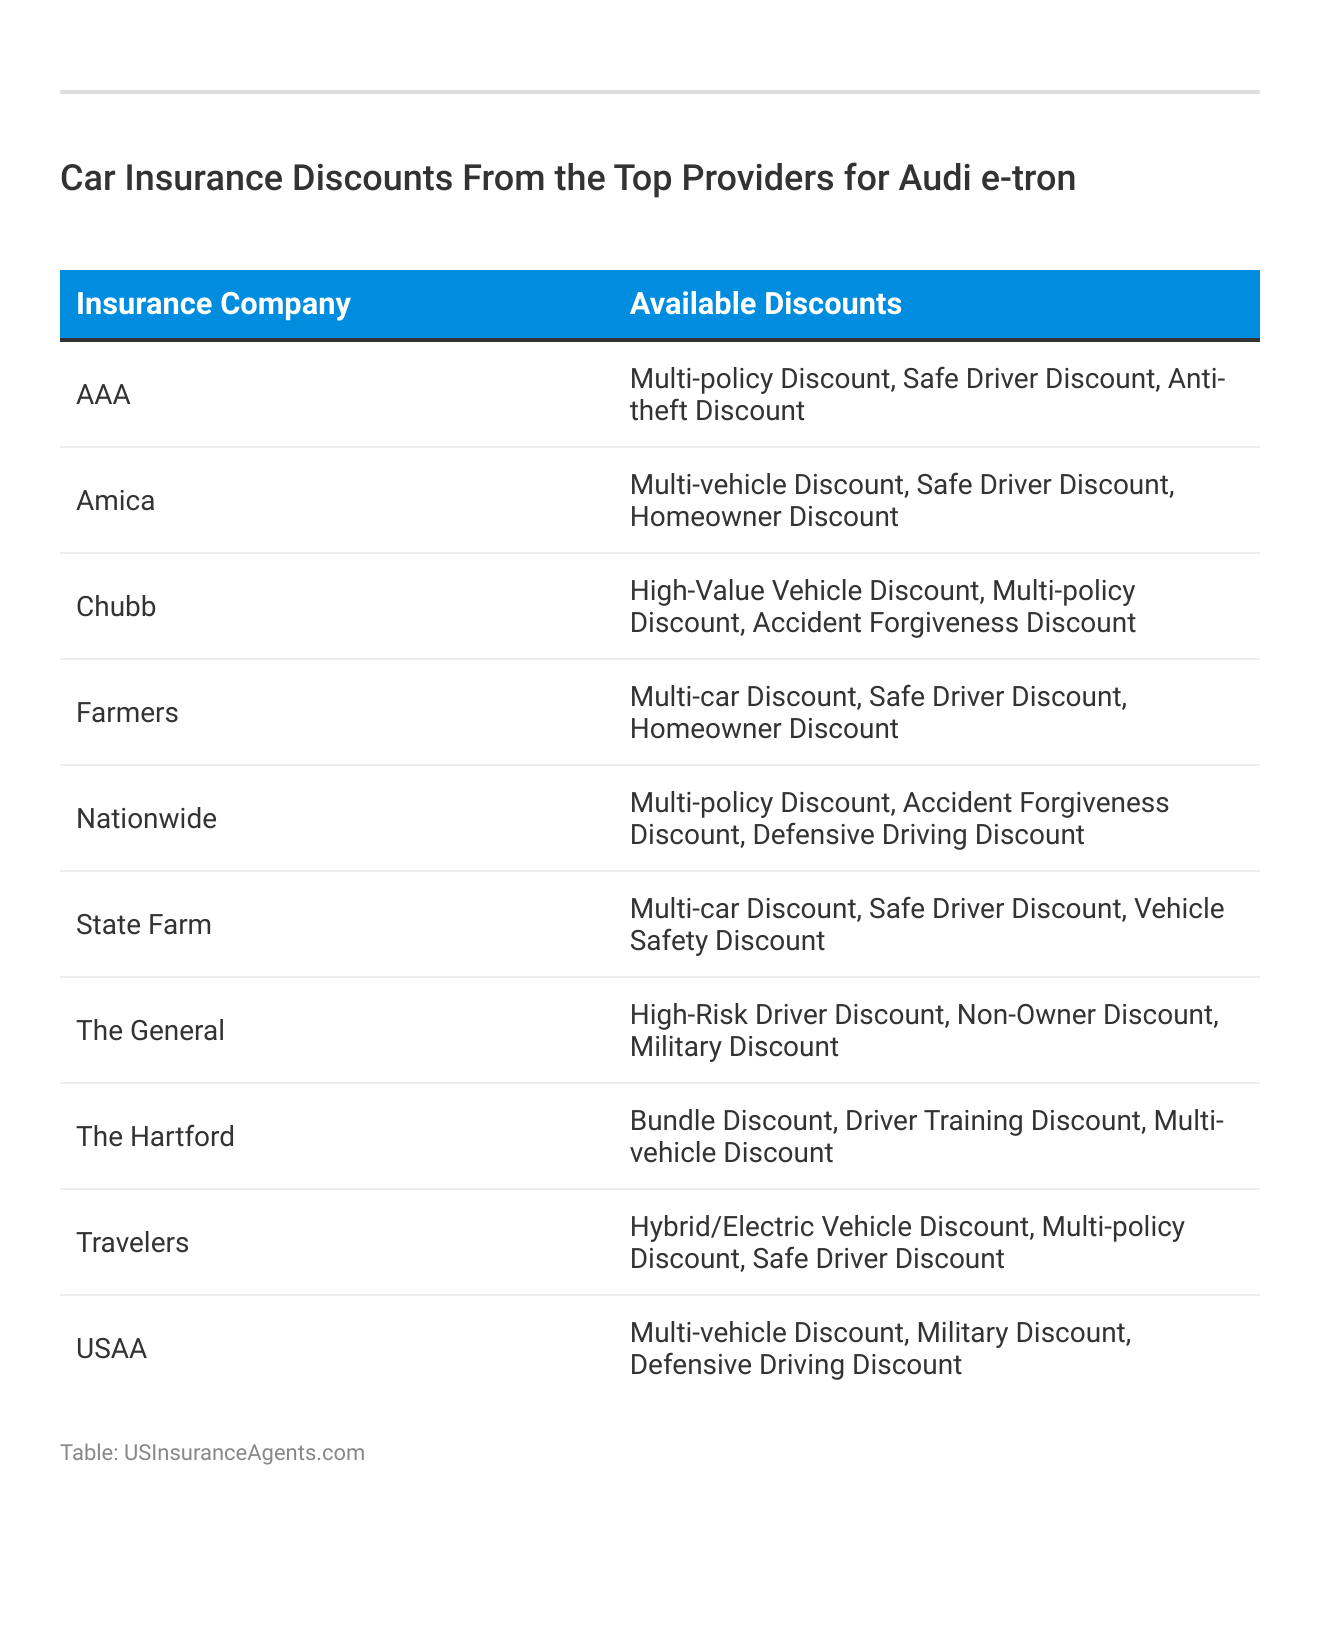 <h3>Car Insurance Discounts From the Top Providers for Audi e-tron</h3>